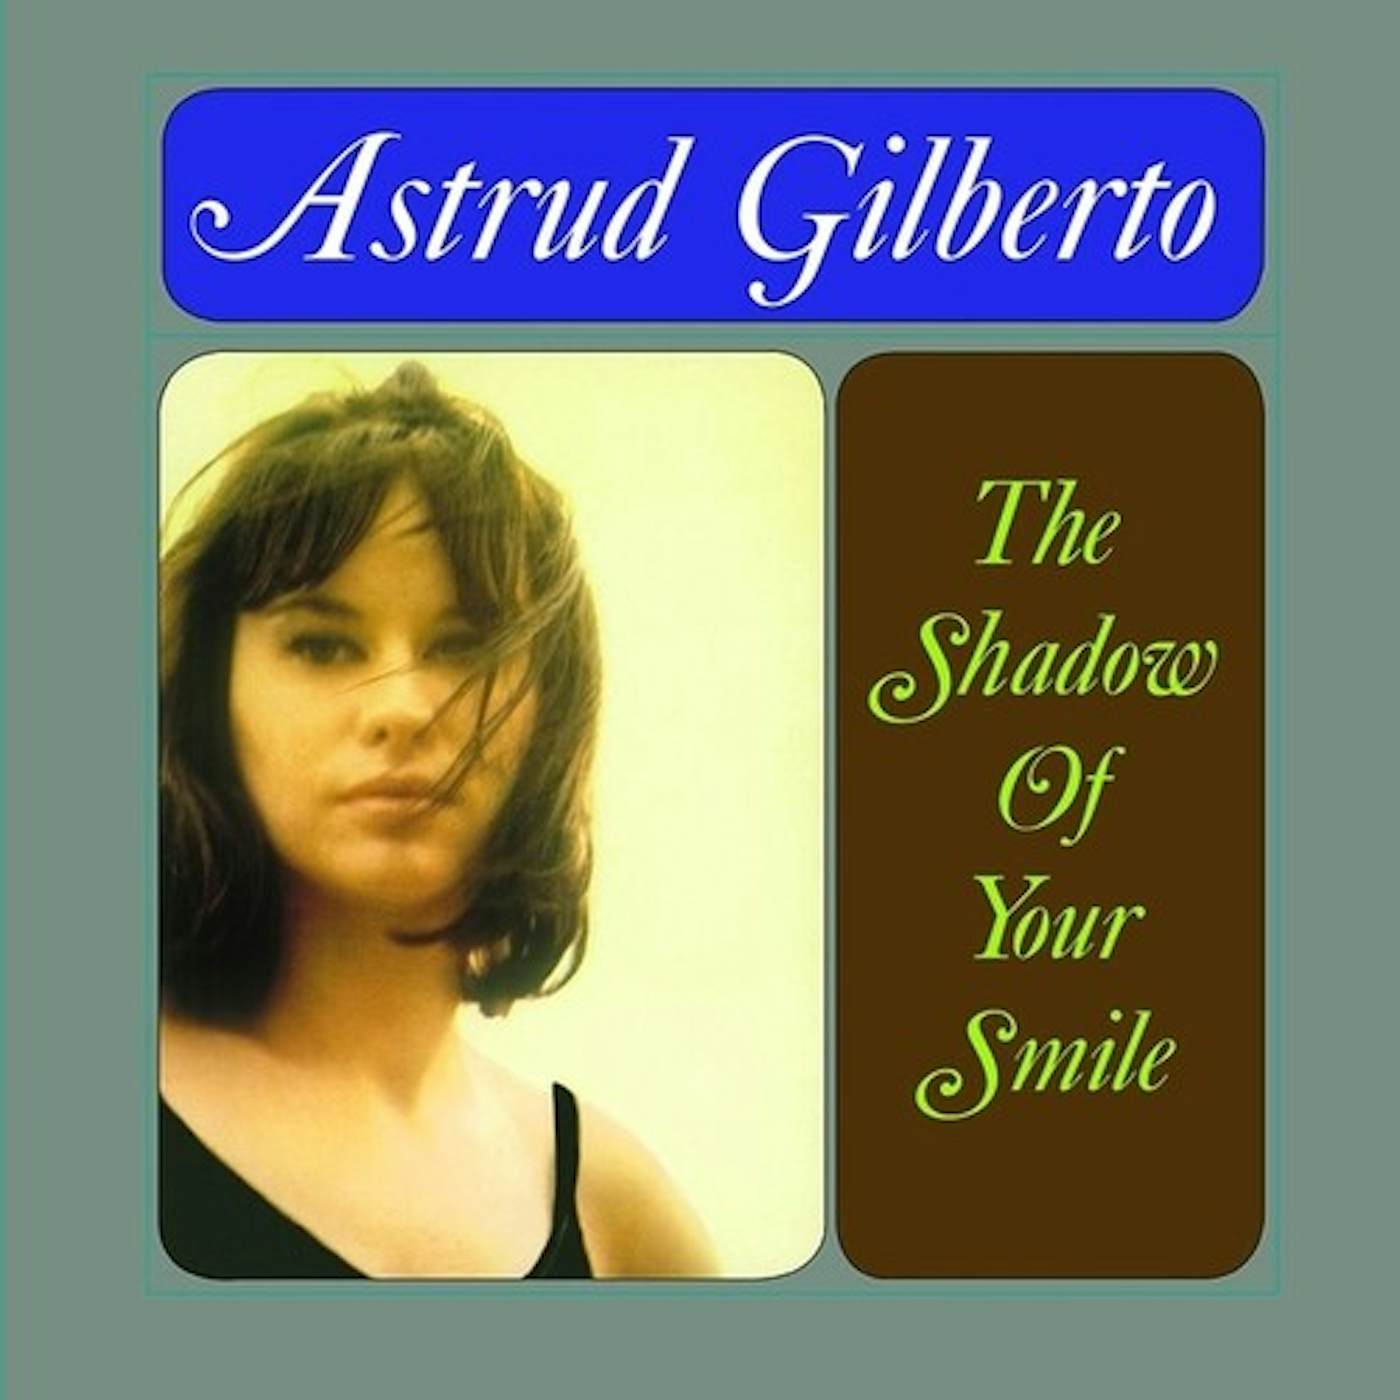 Astrud Gilberto Shadow Of Your Smile Vinyl Record